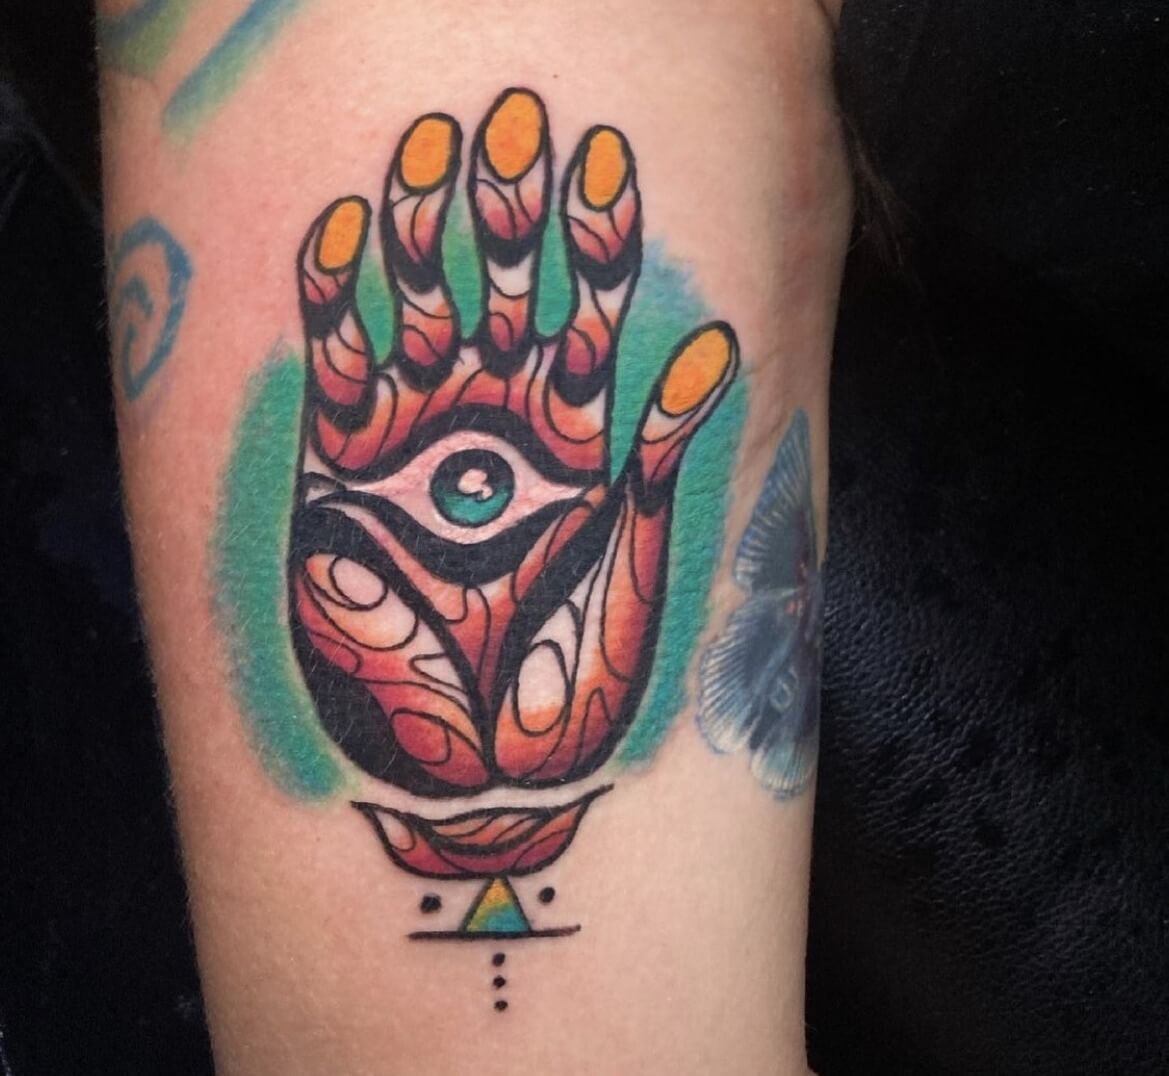 Hamsa Tribal Tattoo By Funk Tha World At Iron Palm Tattoos In Atlanta Georgia. Hamsa Tattoos symbolize the 'Hand of God' in multiple religions but also symbolize fertility as well. Call 404-973-7828 or stop by for a free consultation with Funk. Walk Ins are welcome.